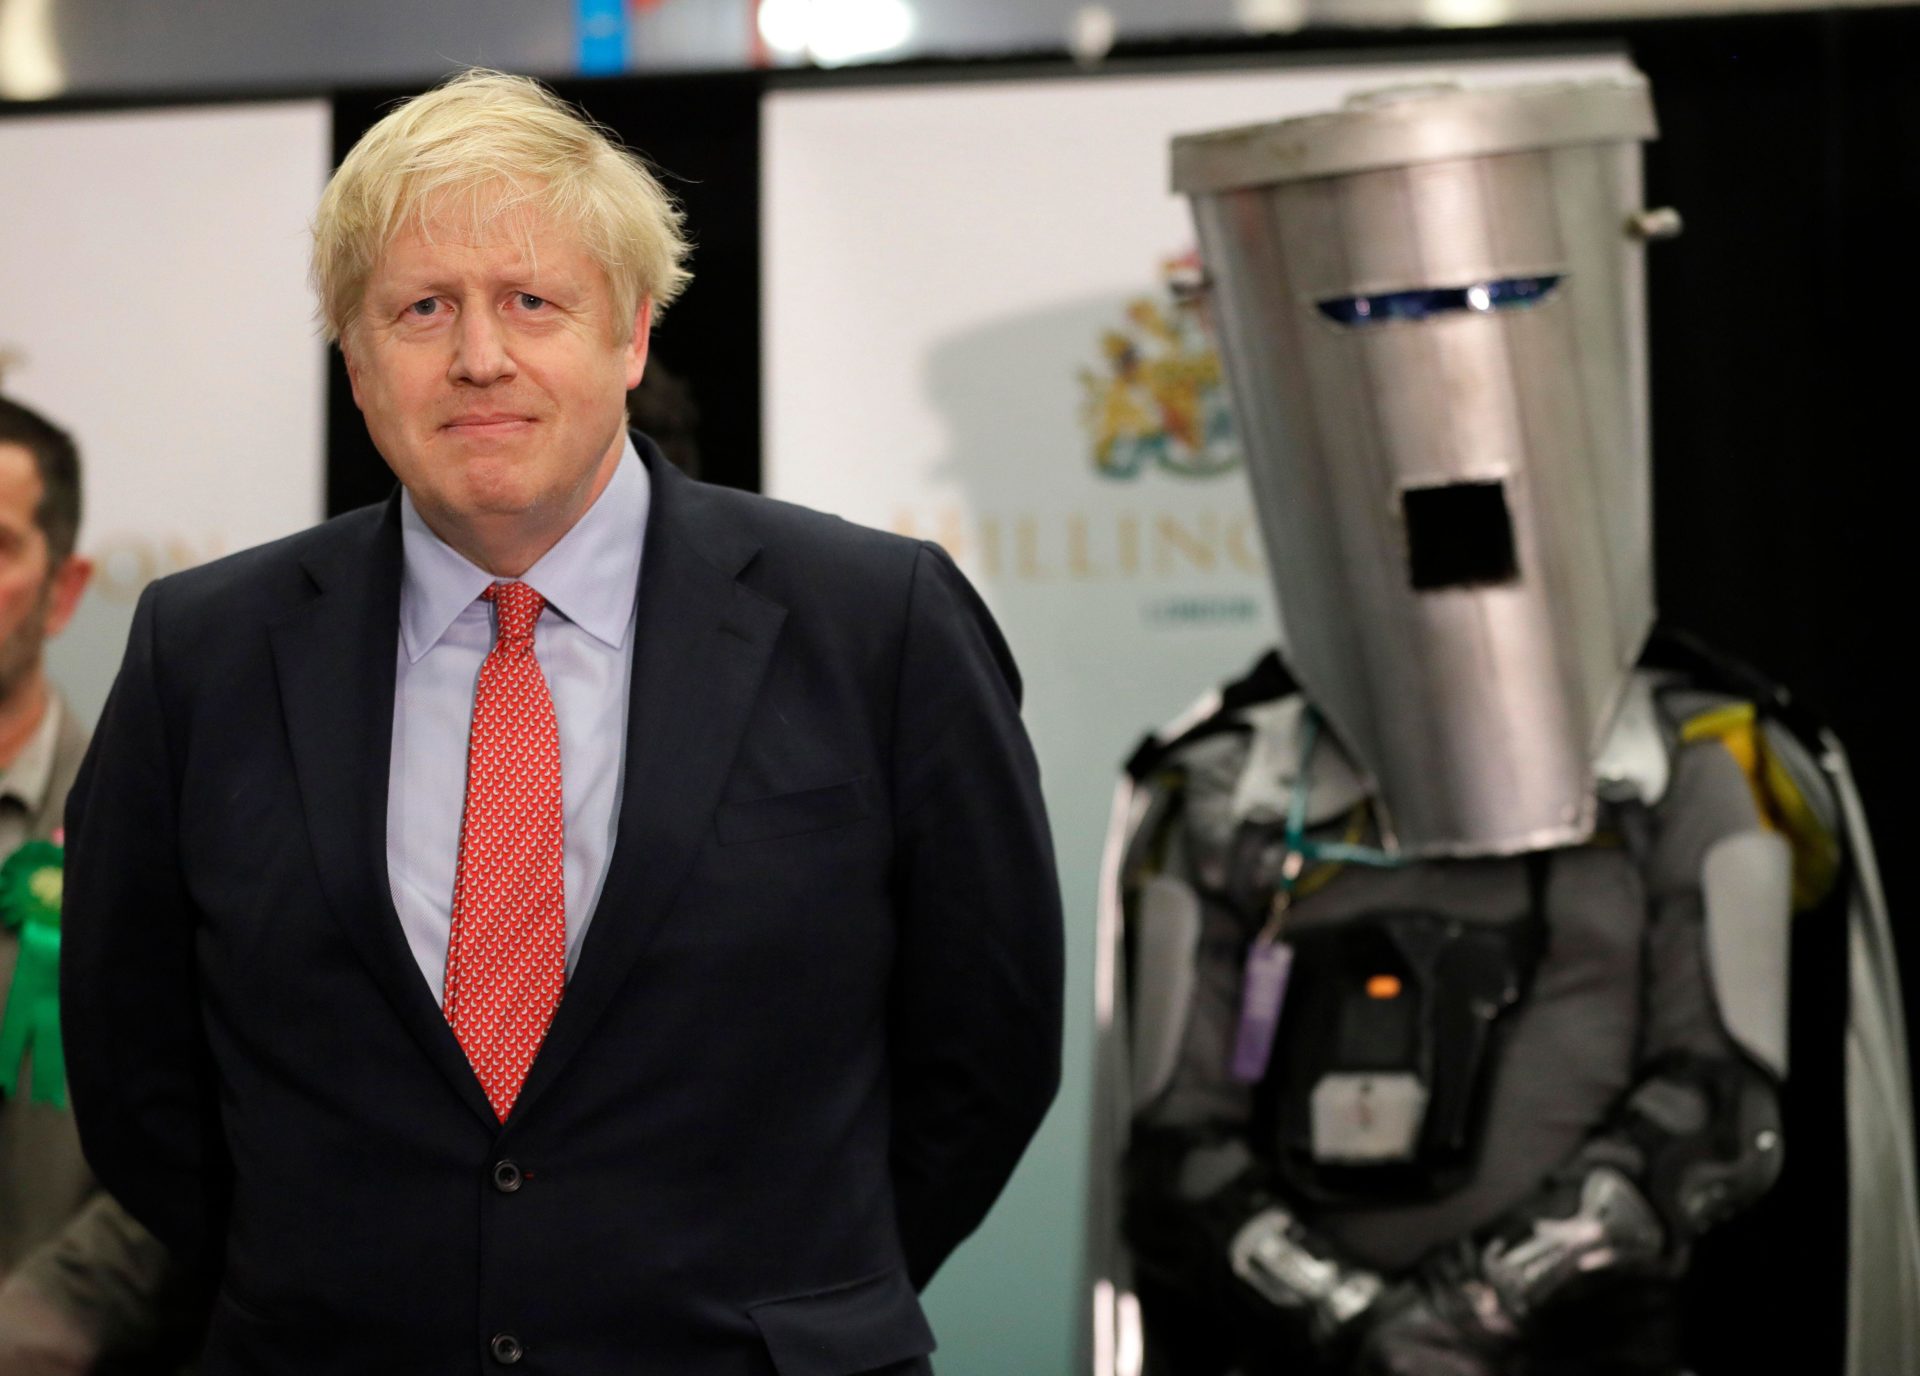 Independent candidate Count Binface stands with Boris Johnson in the Uxbridge and South Ruislip constituency in London, England in December 2019